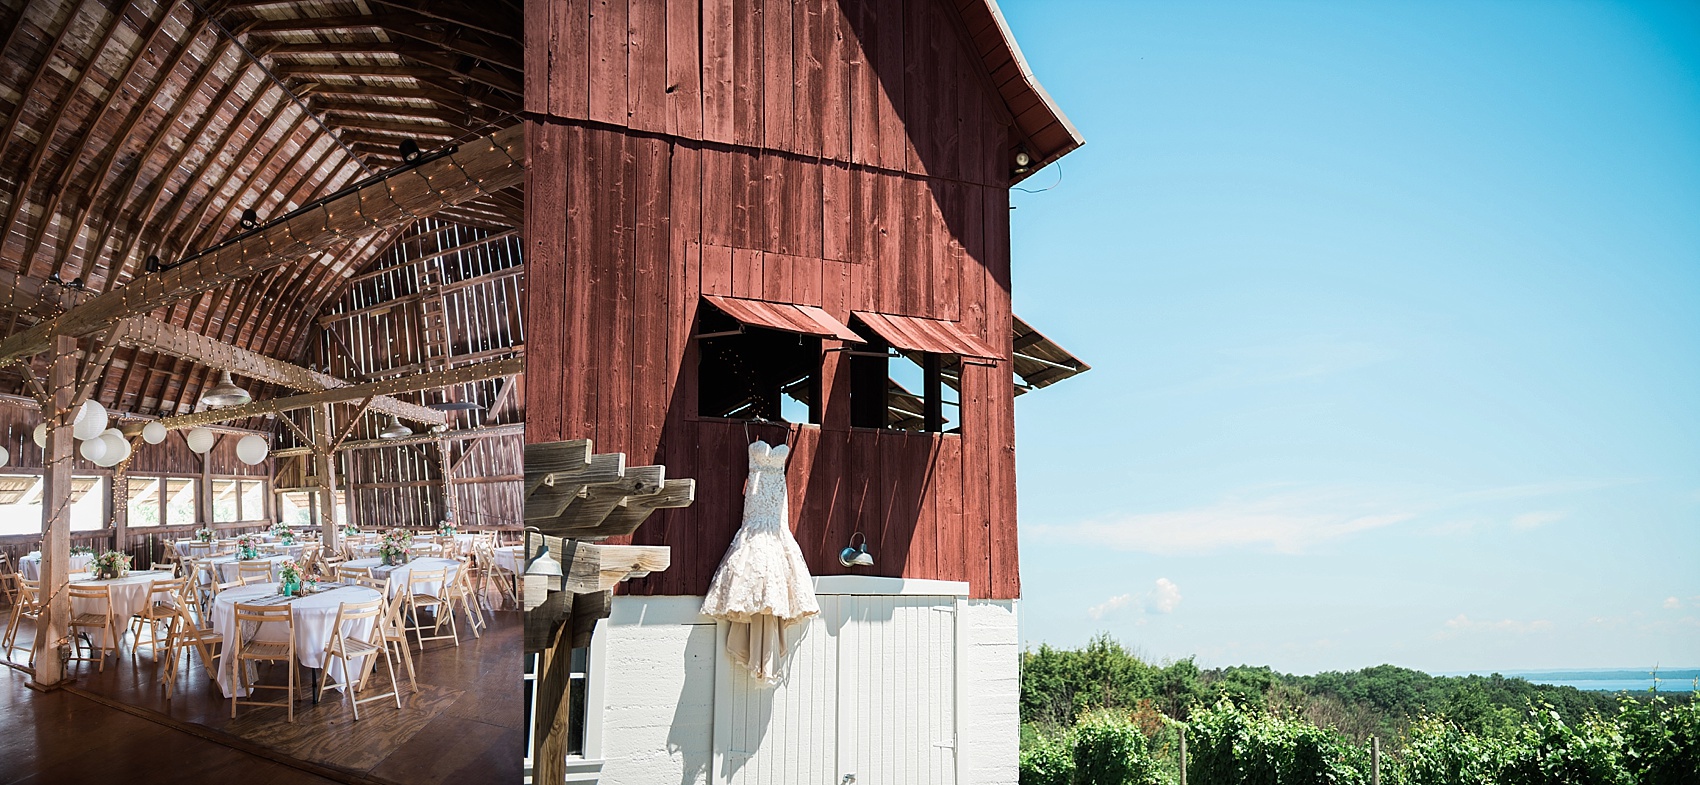 Ciccone Vineyard Wedding Photos, including a reception set up in the barn